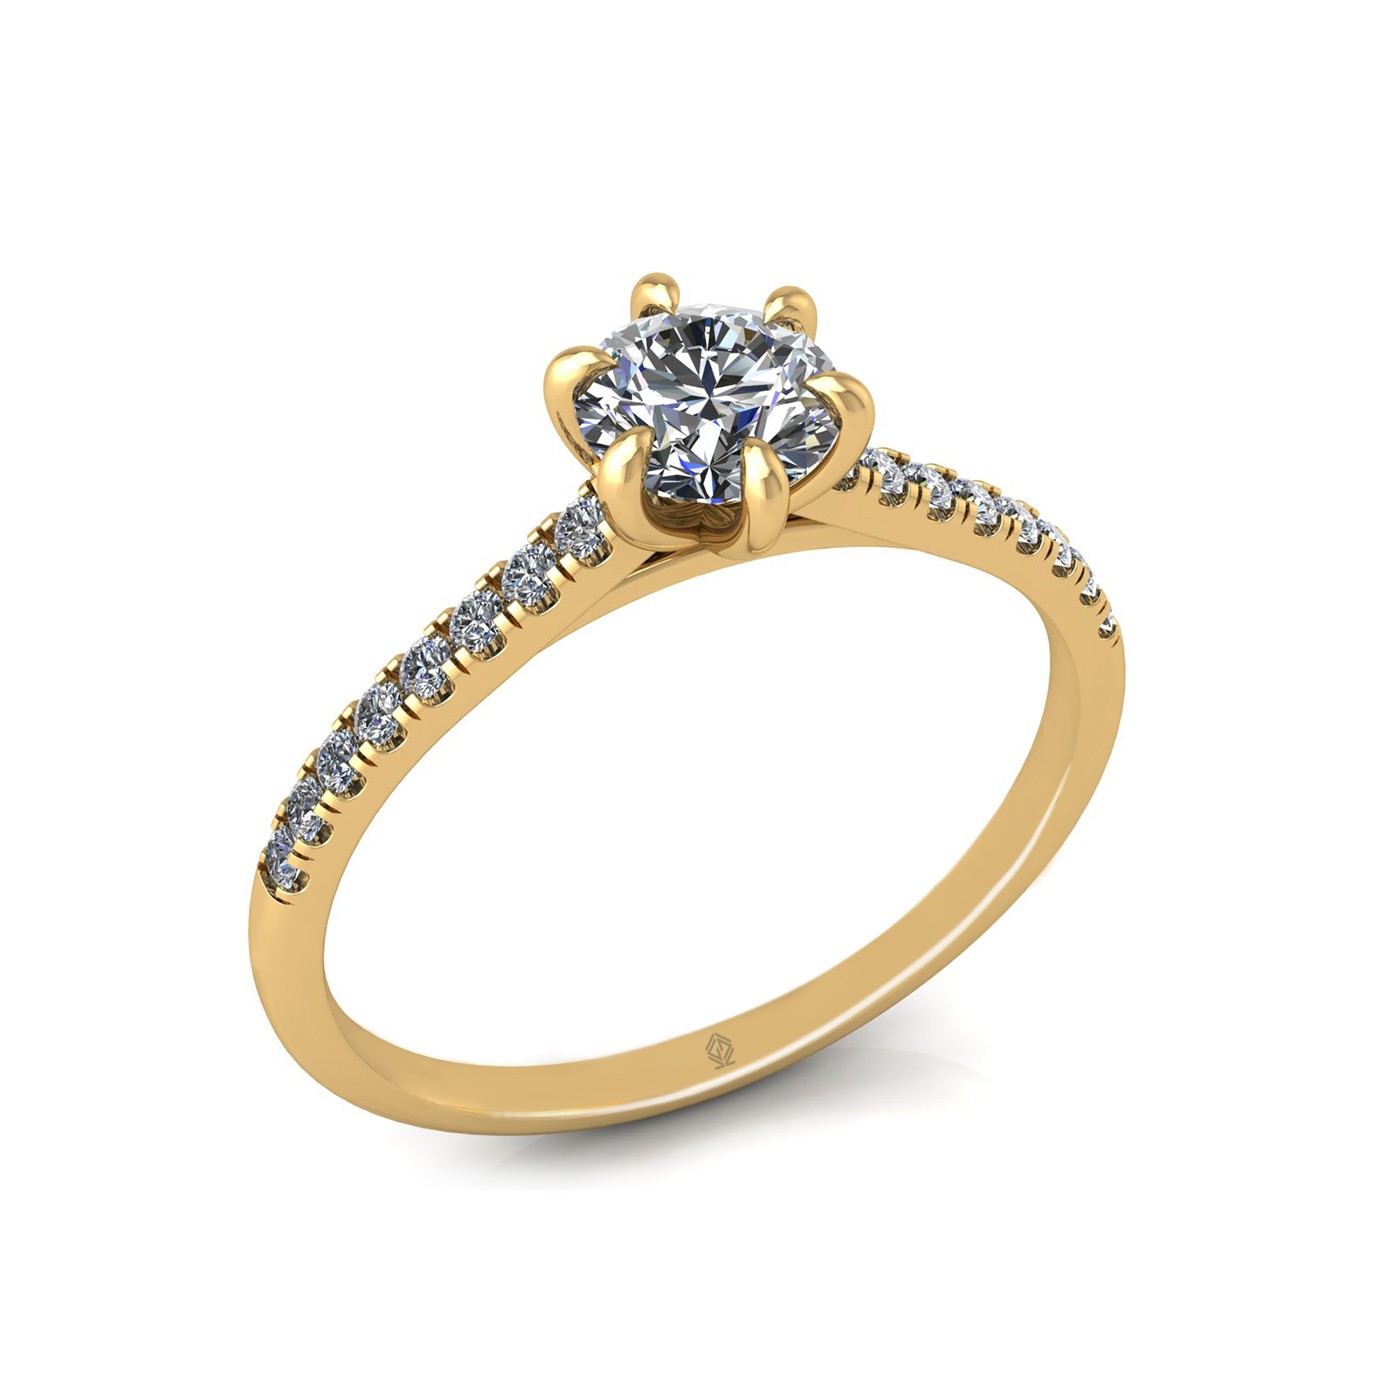 18k yellow gold 0,50 ct 6 prongs round cut diamond engagement ring with whisper thin pavÉ set band